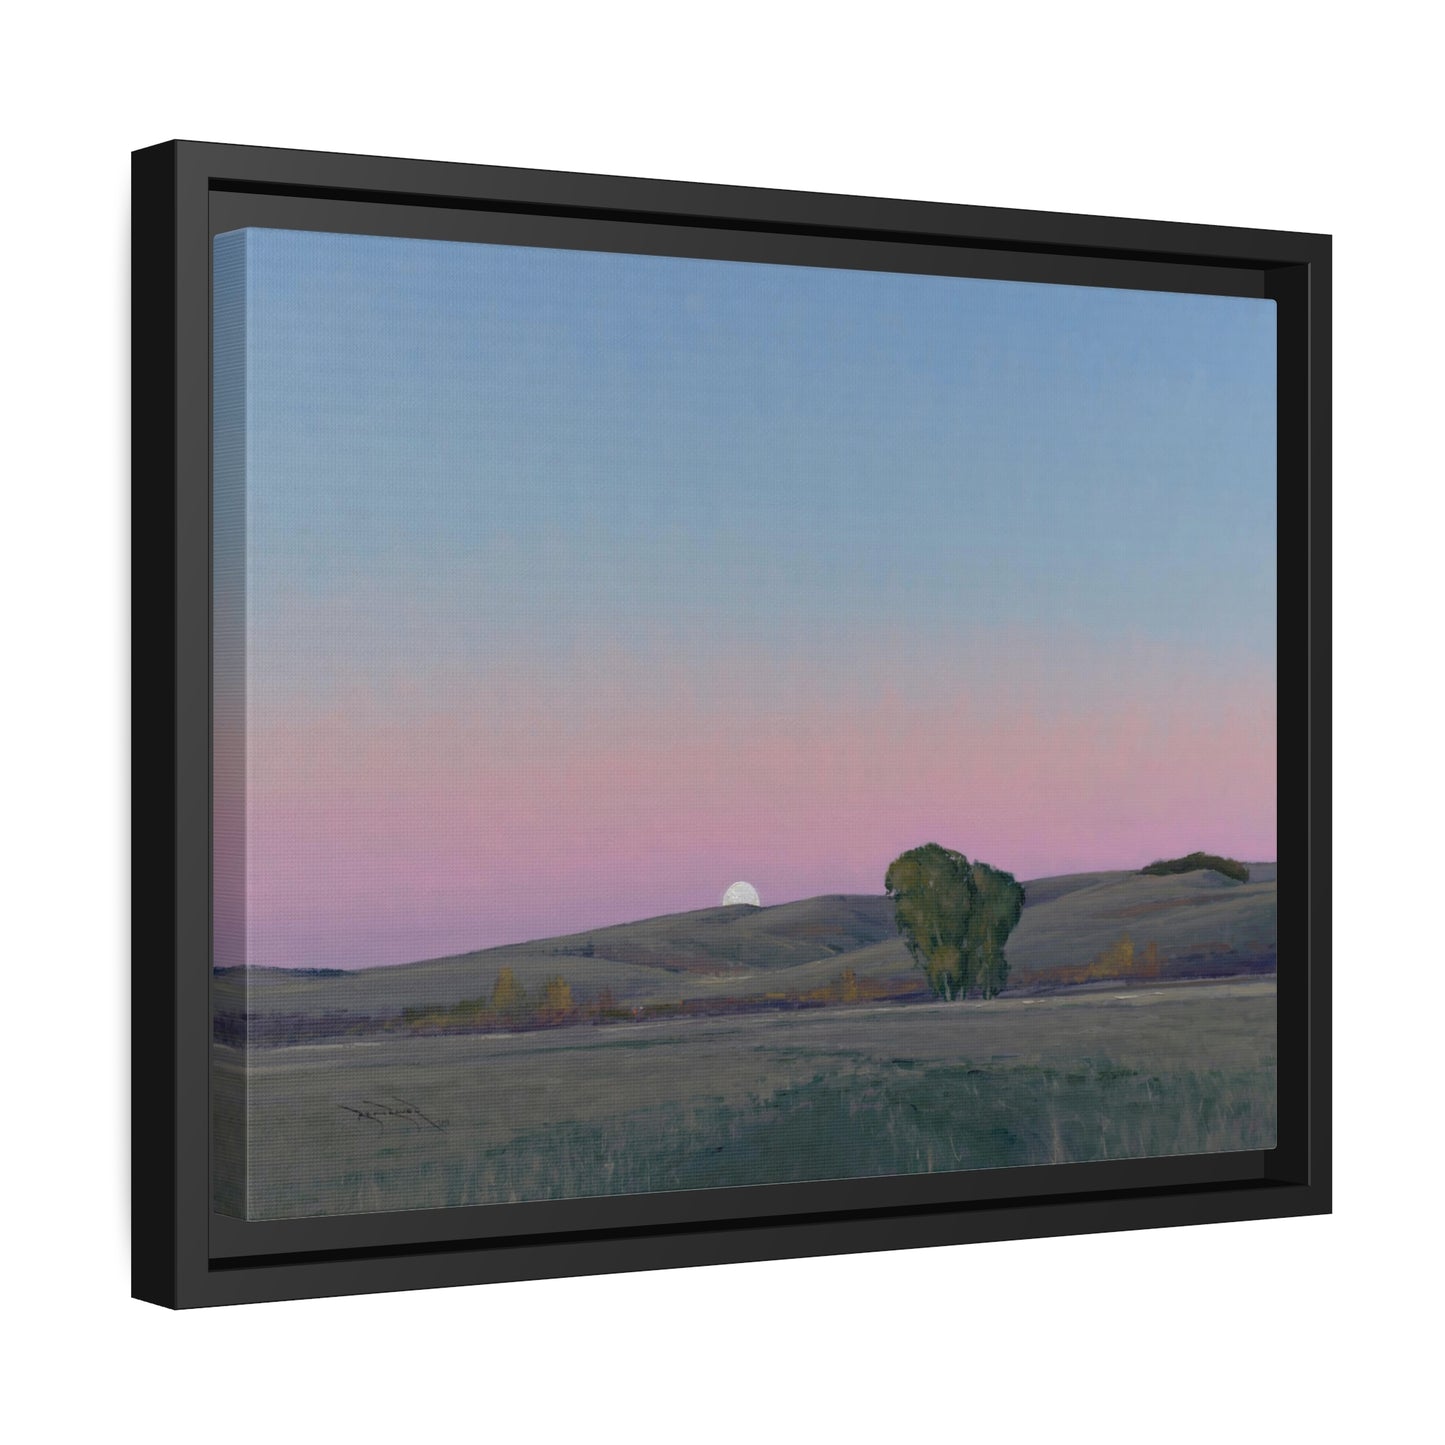 Ben Bauer: "Moonrise in Lowry, MN" - Framed Canvas Reproduction